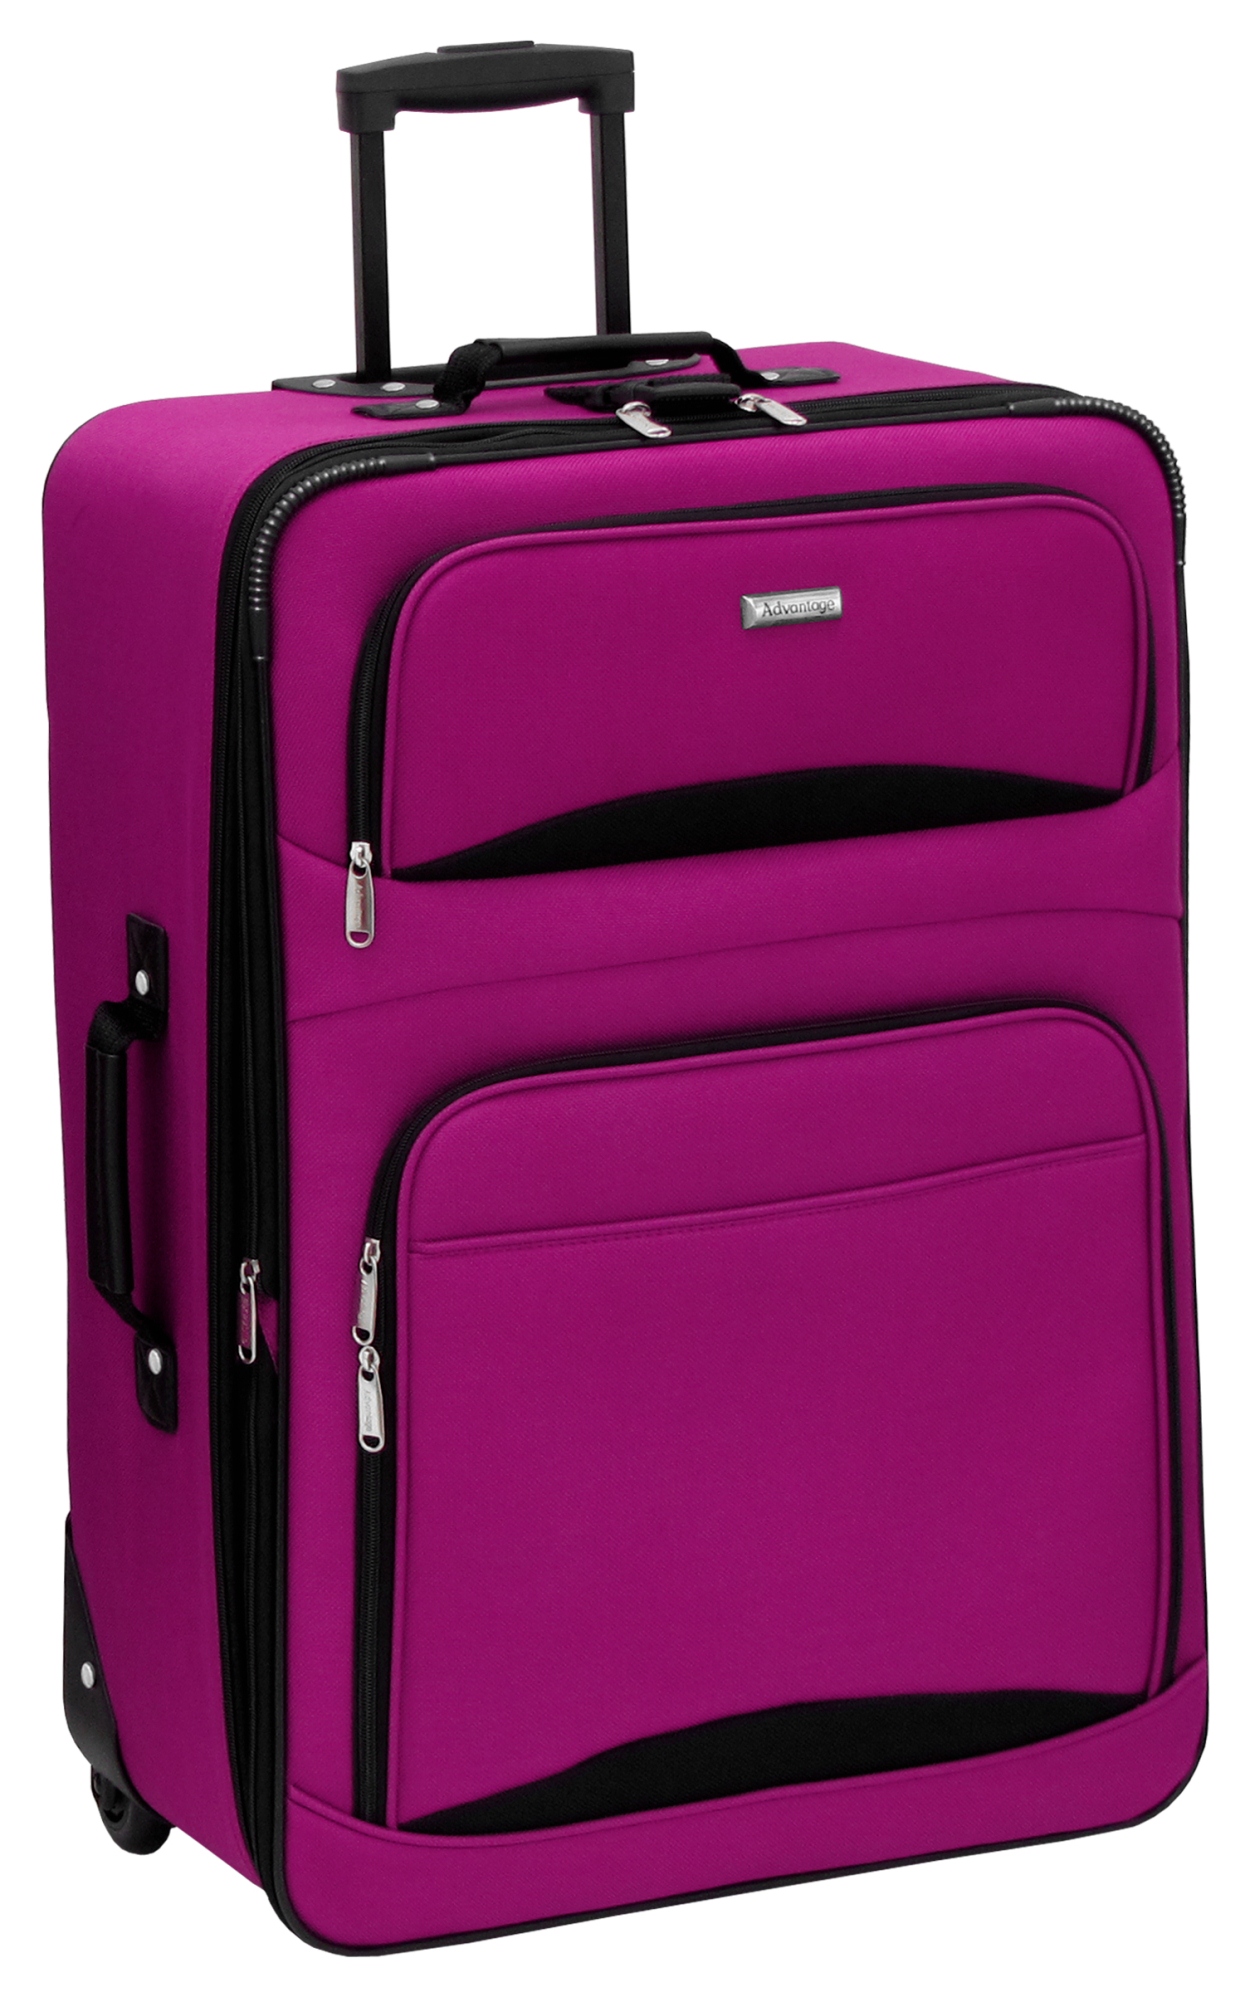 25in Lightweight Upright - Raspberry - Home - Luggage & Bags - Luggage & Suitcases - Upright Luggage